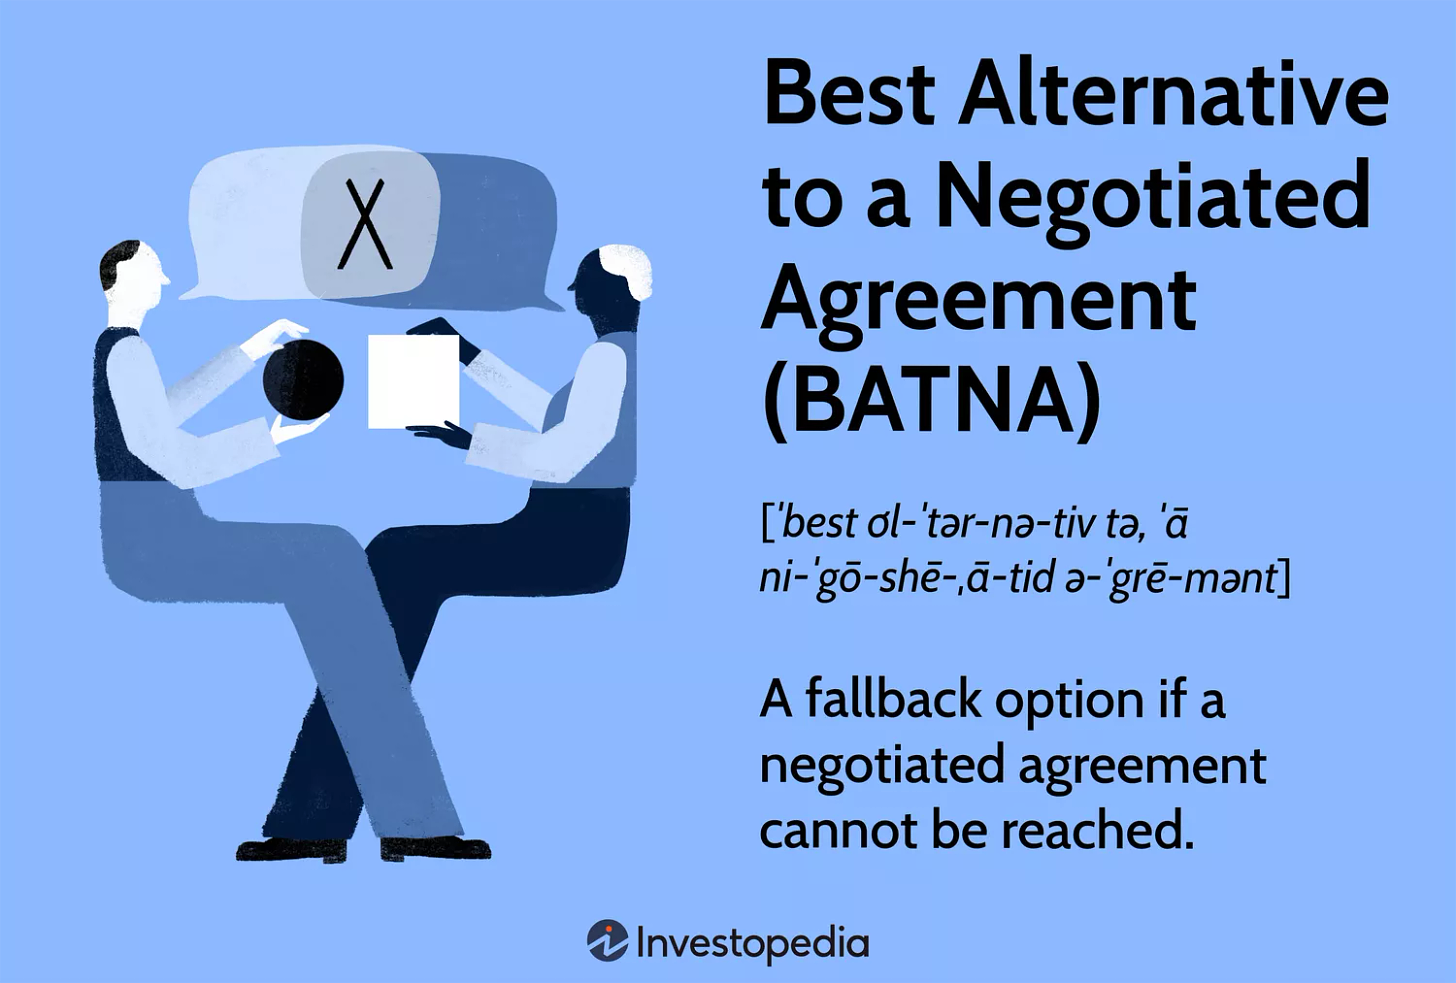 Best Alternative to a Negotiated Agreement (BATNA): A fallback option if a negotiated agreement cannot be reached.